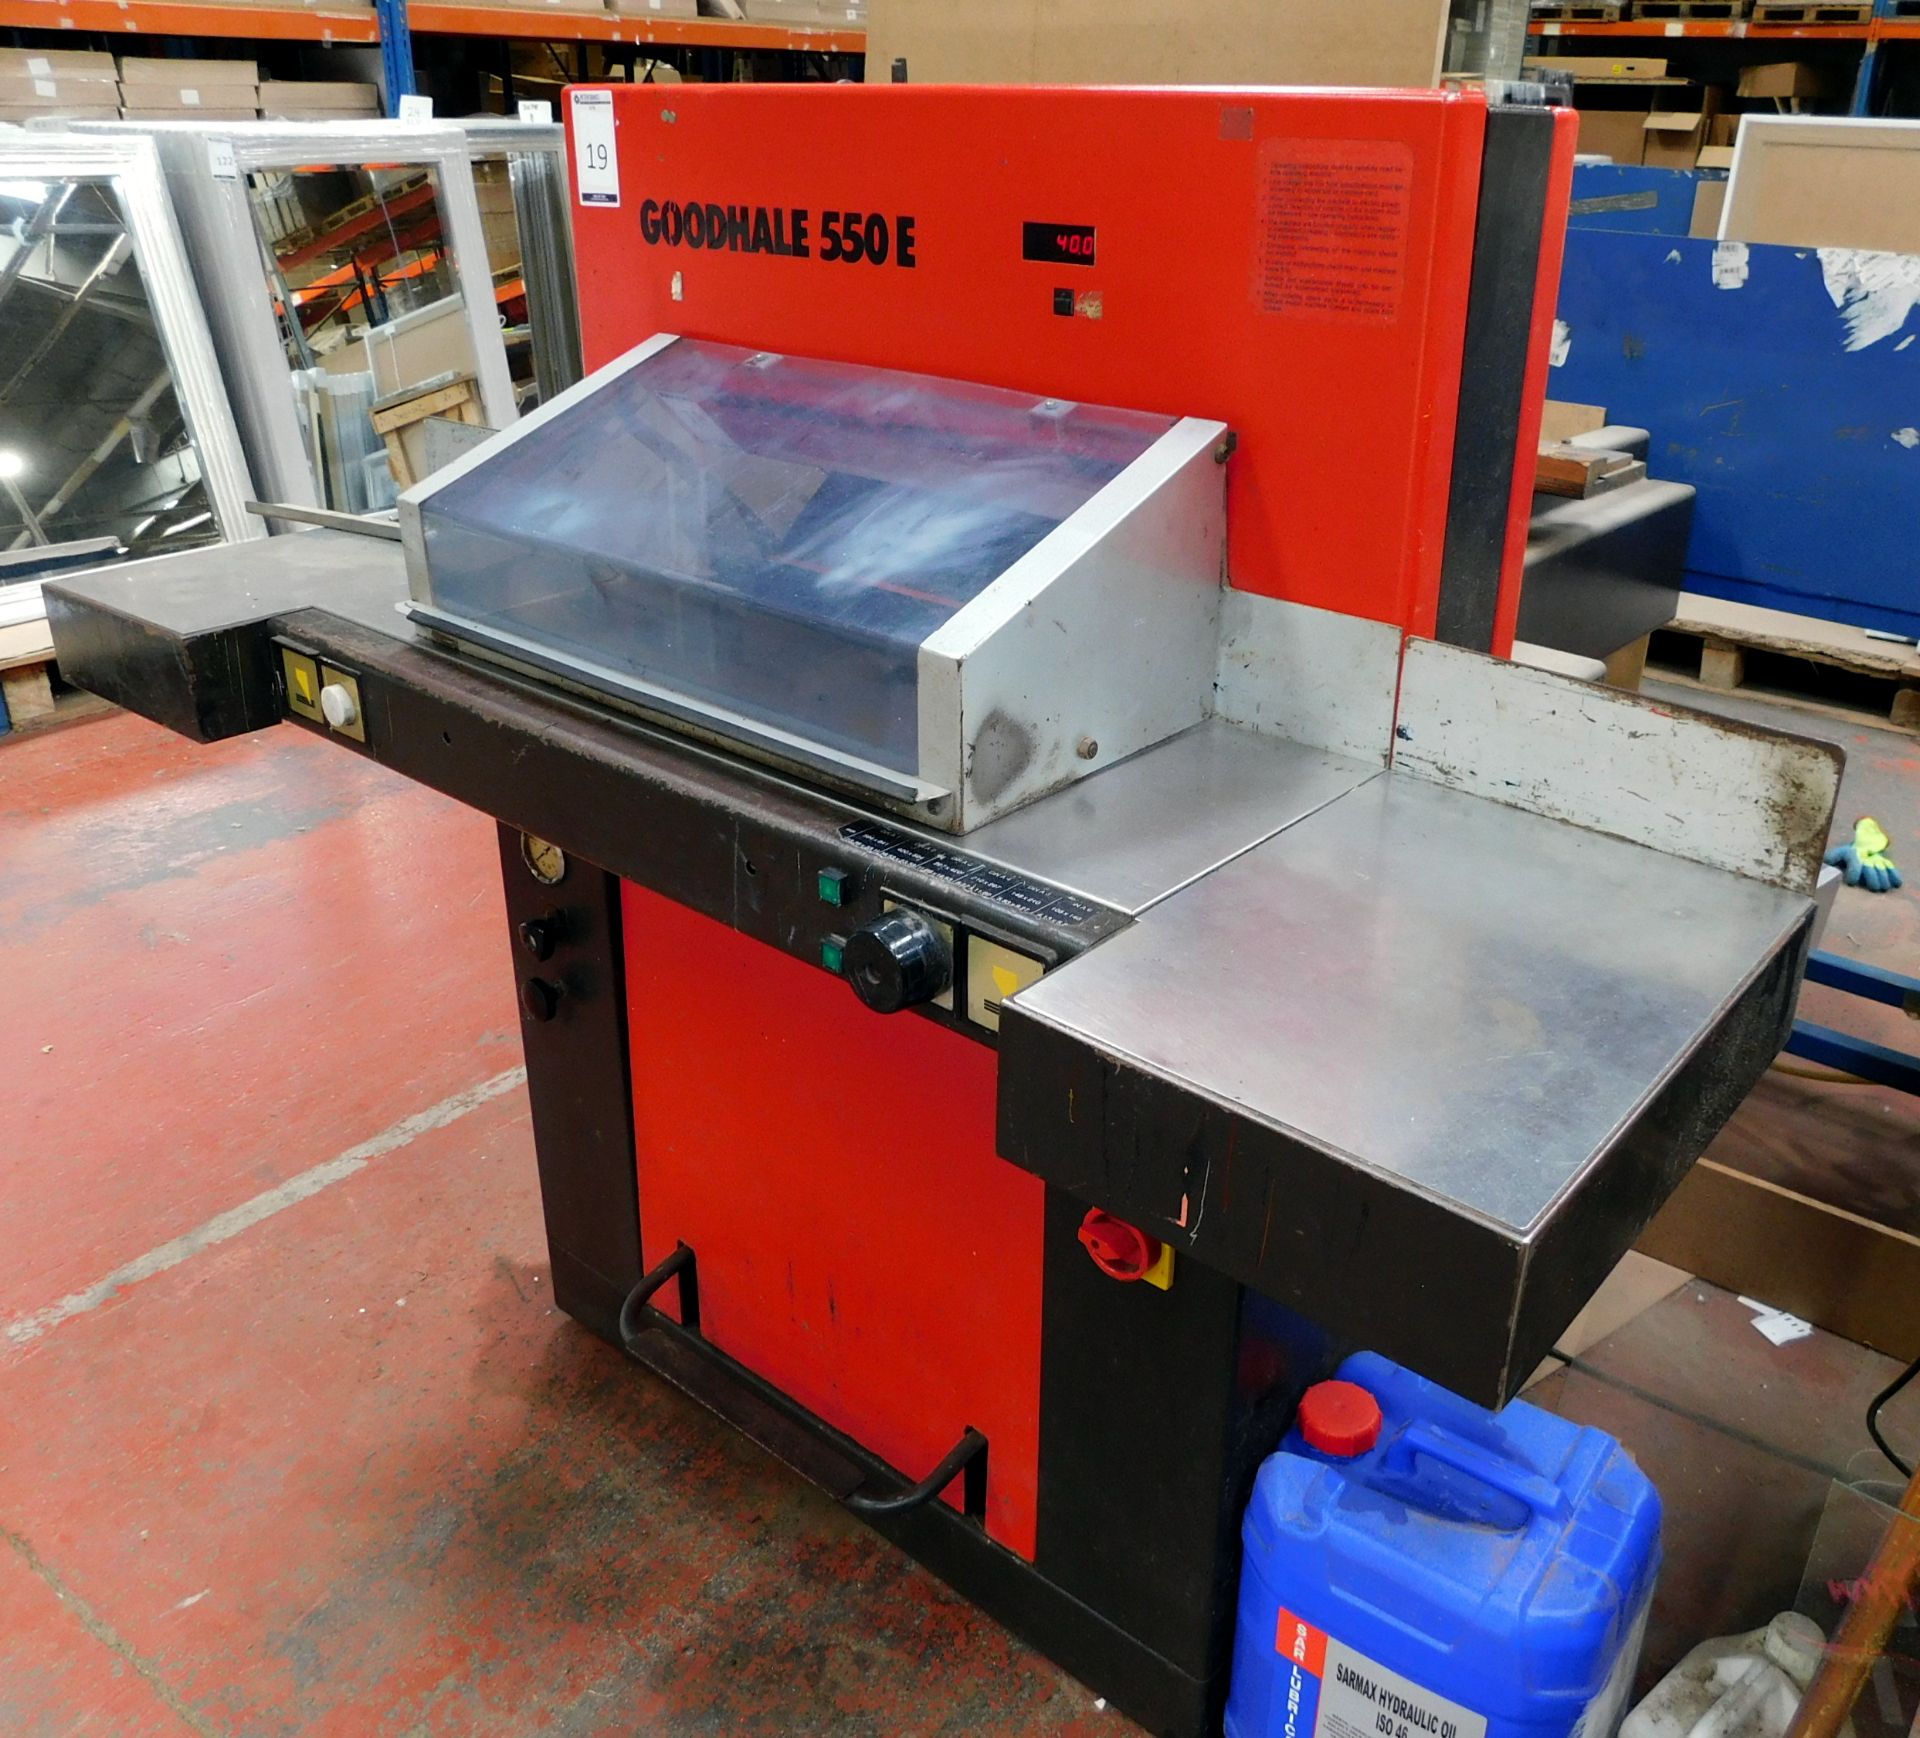 Goodhale Multi Cut 10/550E 120bar Guillotine, 240v (Collection – Friday 25th, Tuesday 29th or - Image 2 of 5